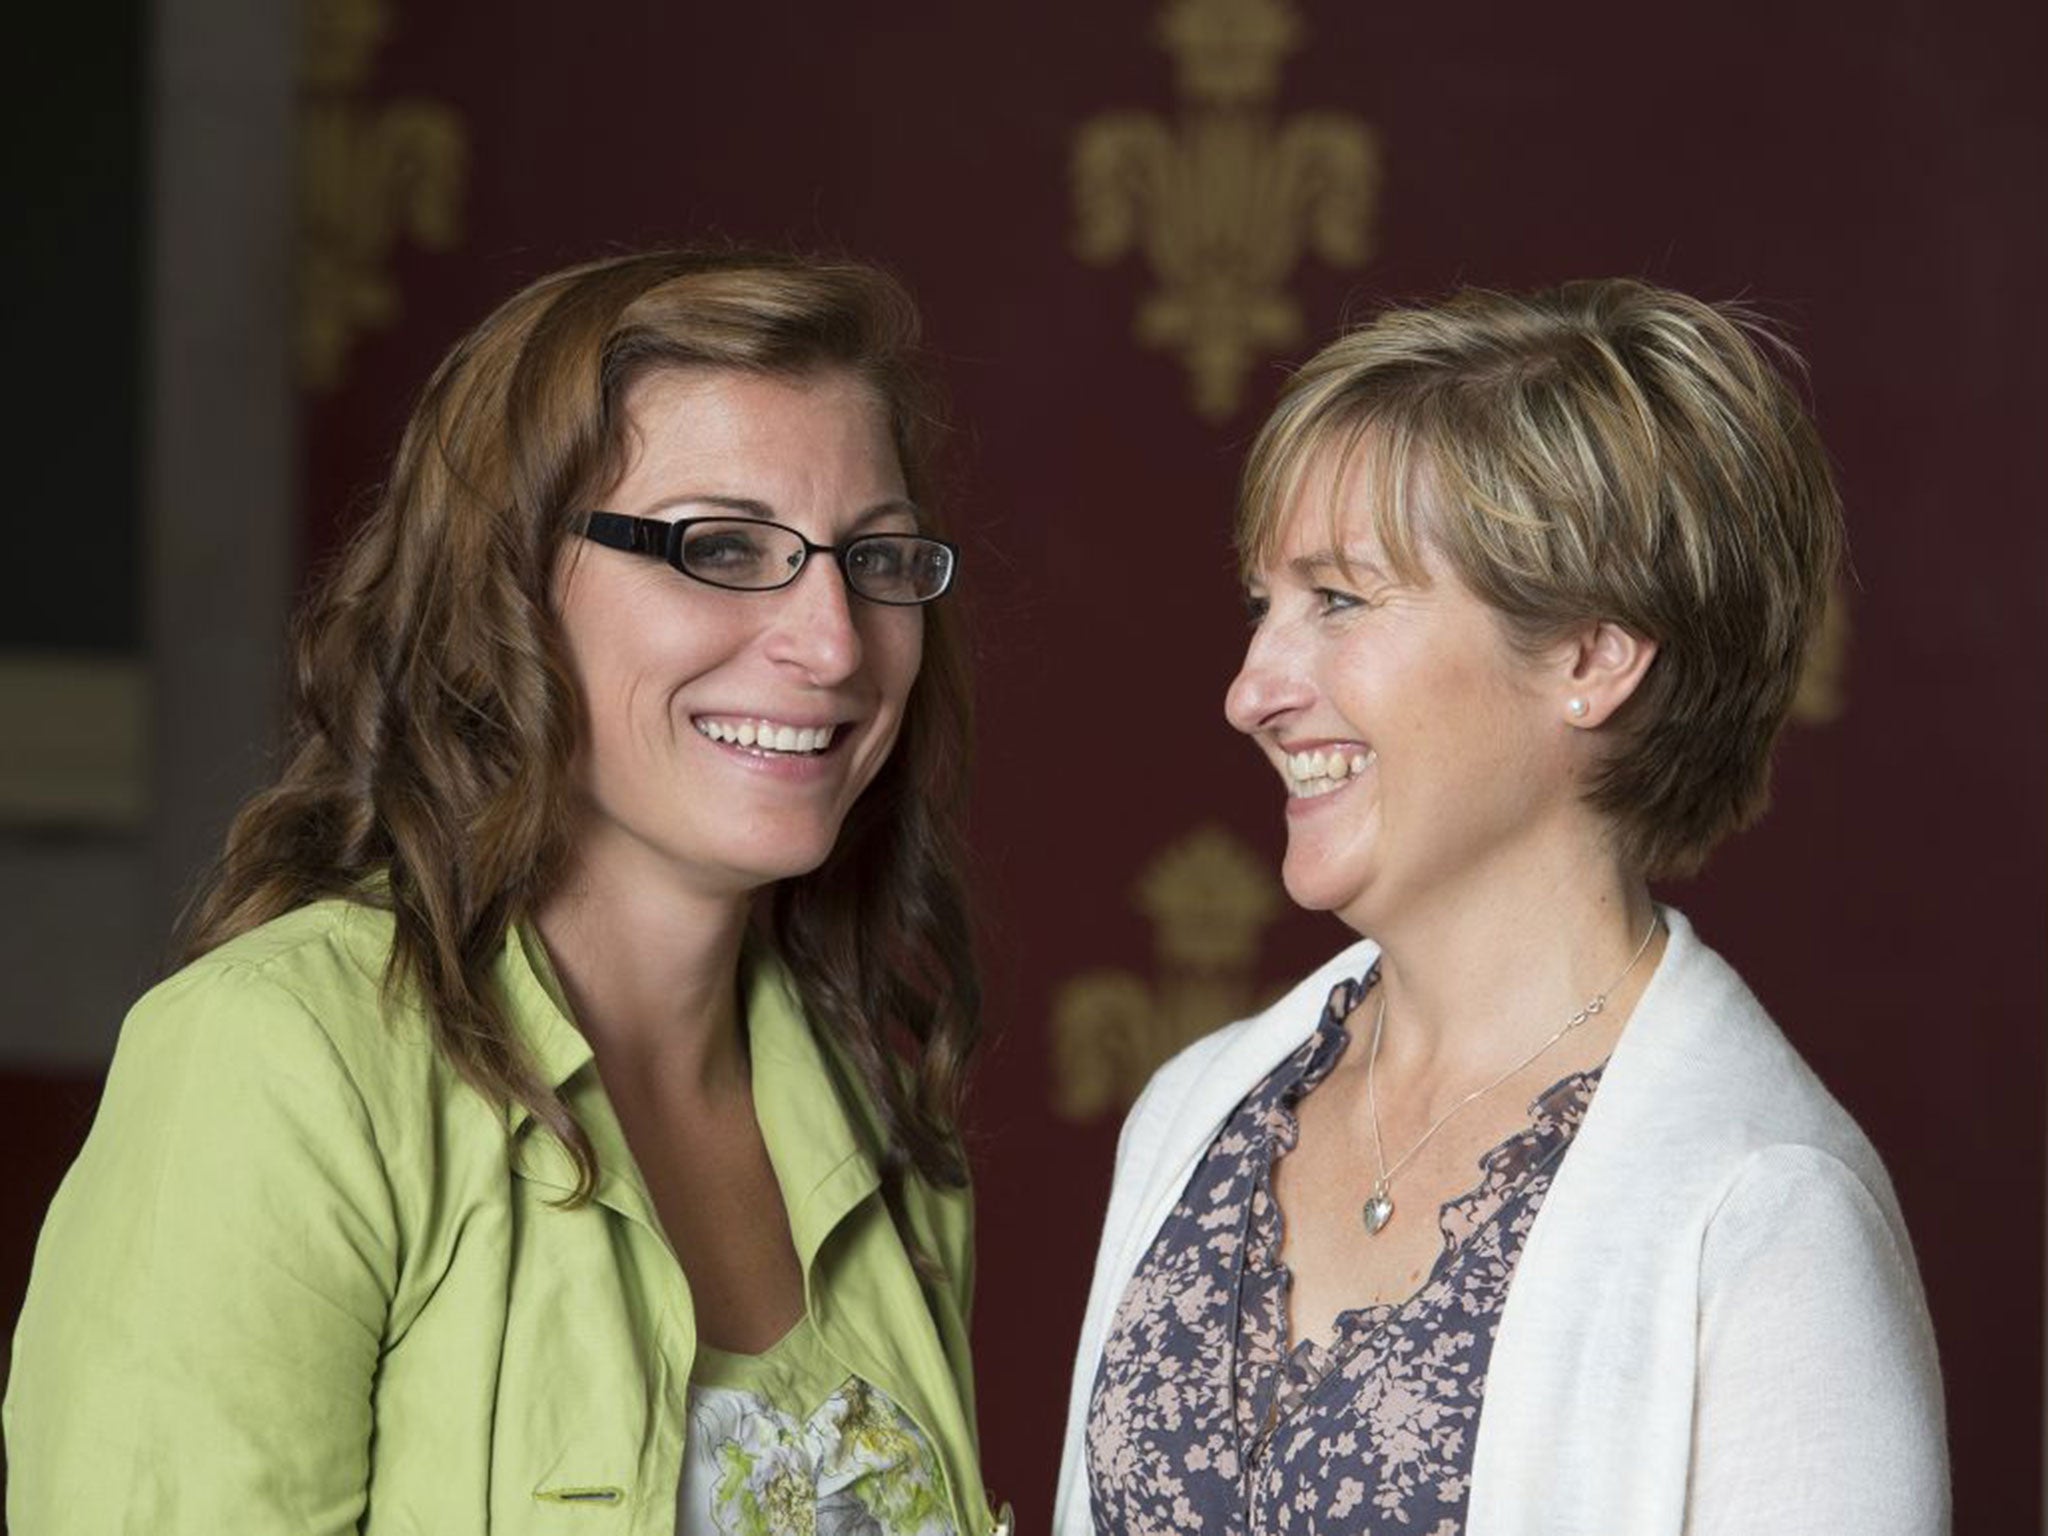 Gemma Coles, left, offered a kidney to Karen Brown before meeting